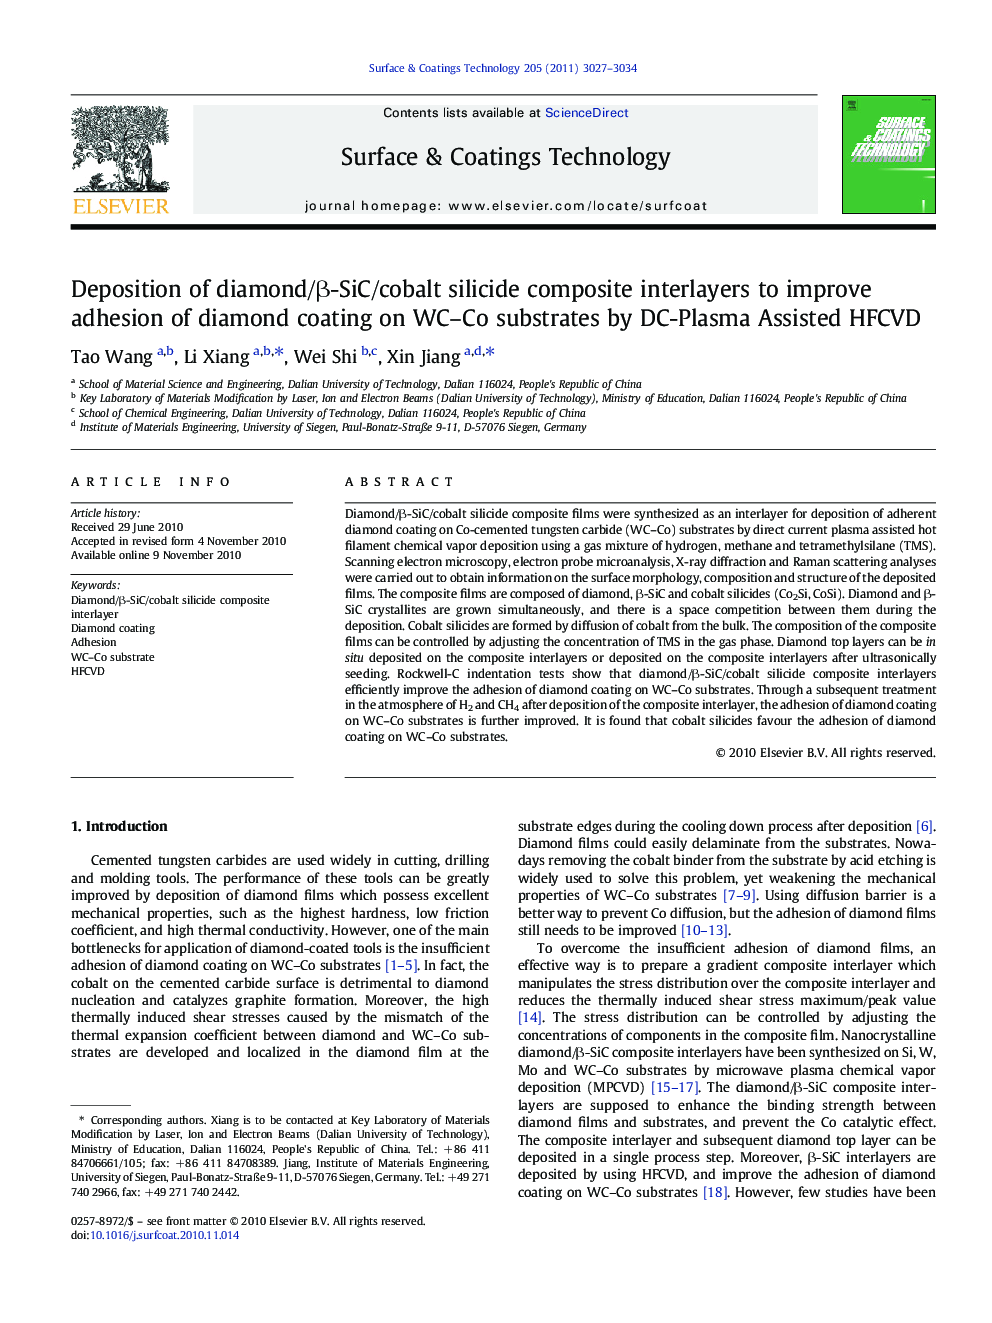 Deposition of diamond/Î²-SiC/cobalt silicide composite interlayers to improve adhesion of diamond coating on WC-Co substrates by DC-Plasma Assisted HFCVD